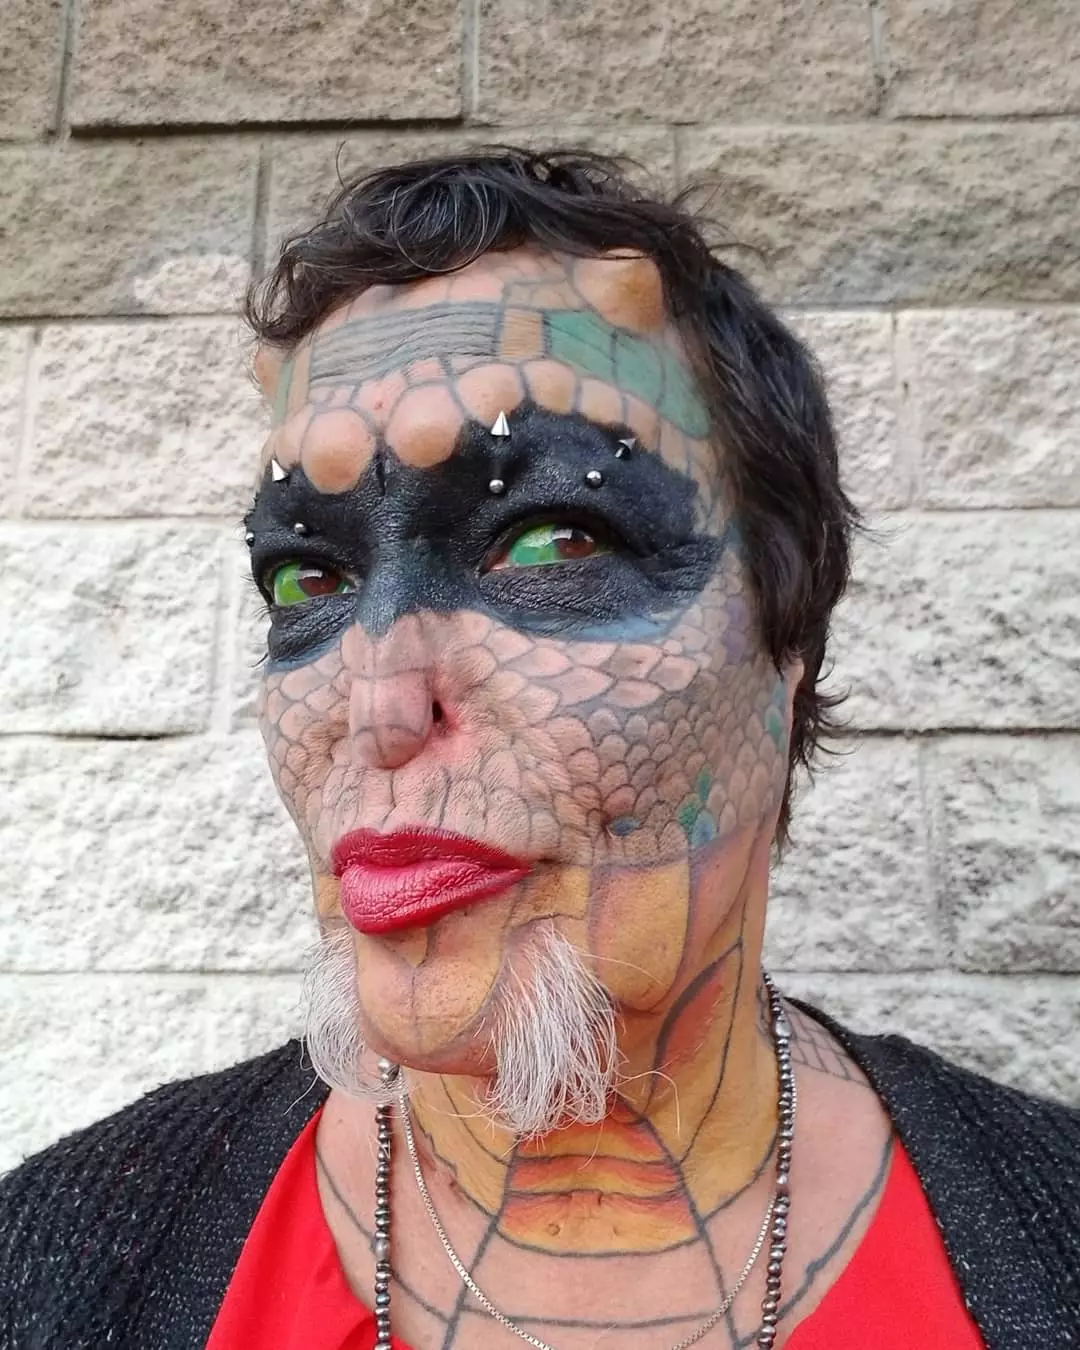 They have so far spent £61,000 on turning themselves into a 'Human Dragon'.